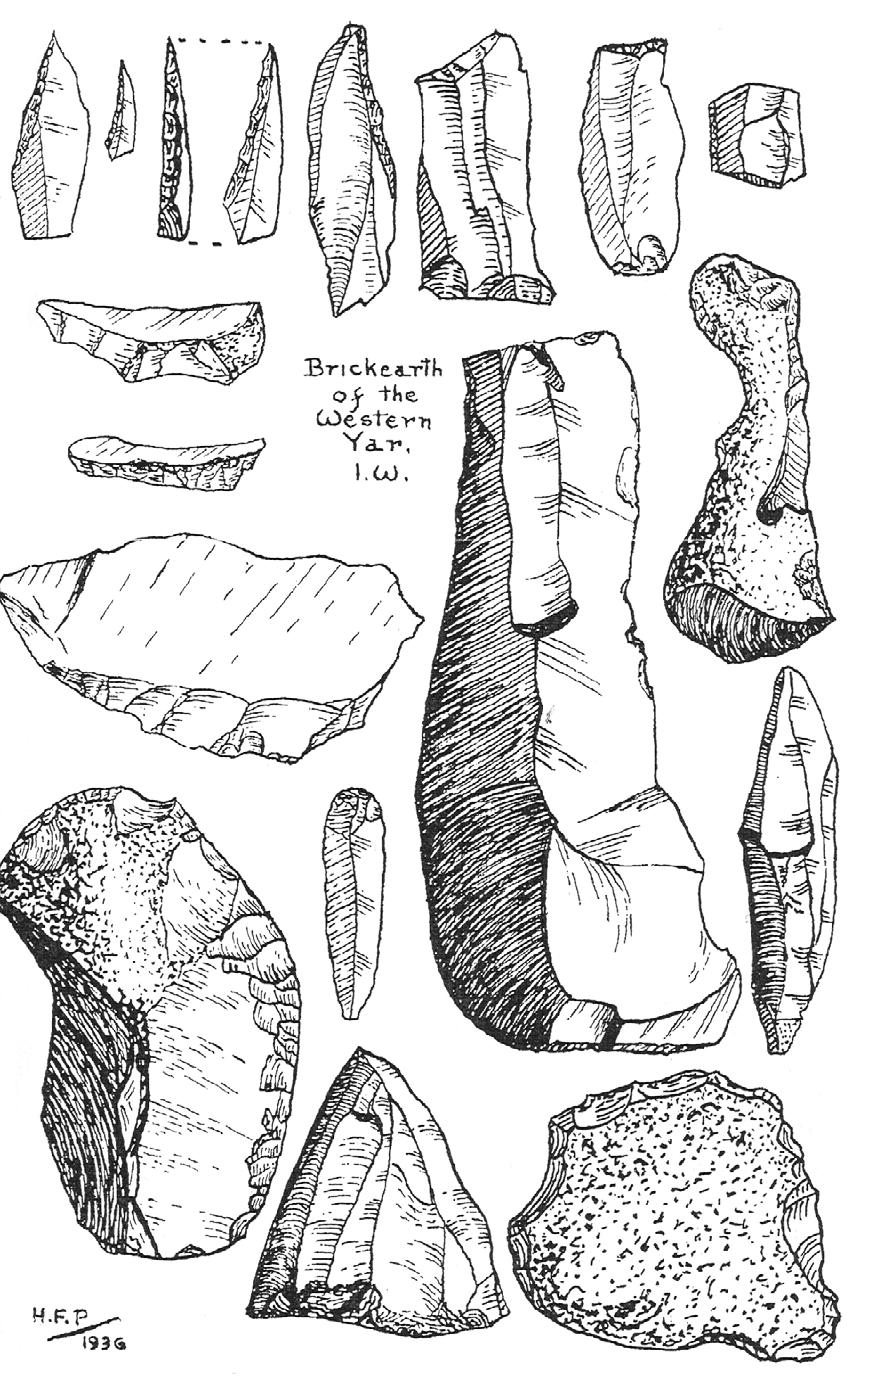 6 Hubert Poole s illustrations of Mesolithic flint tools from the Old Western Yar River gravels The study of the Mesolithic Period can help us to understand how early